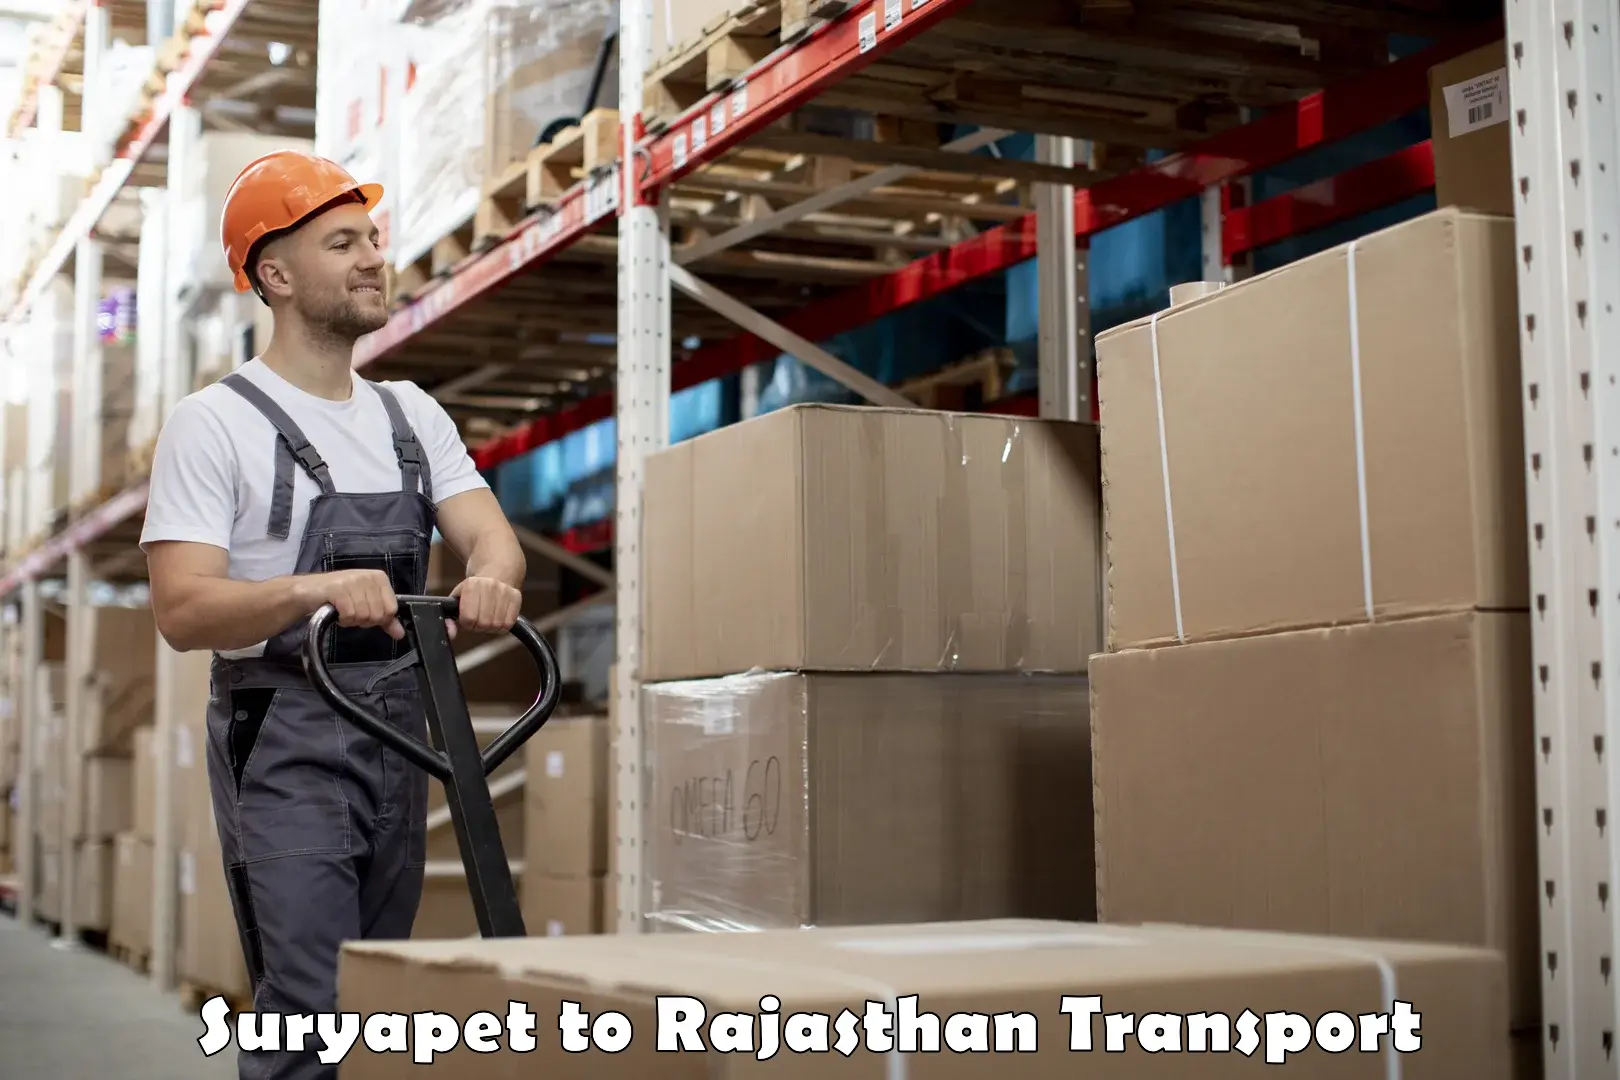 Truck transport companies in India Suryapet to Bari Dholpur